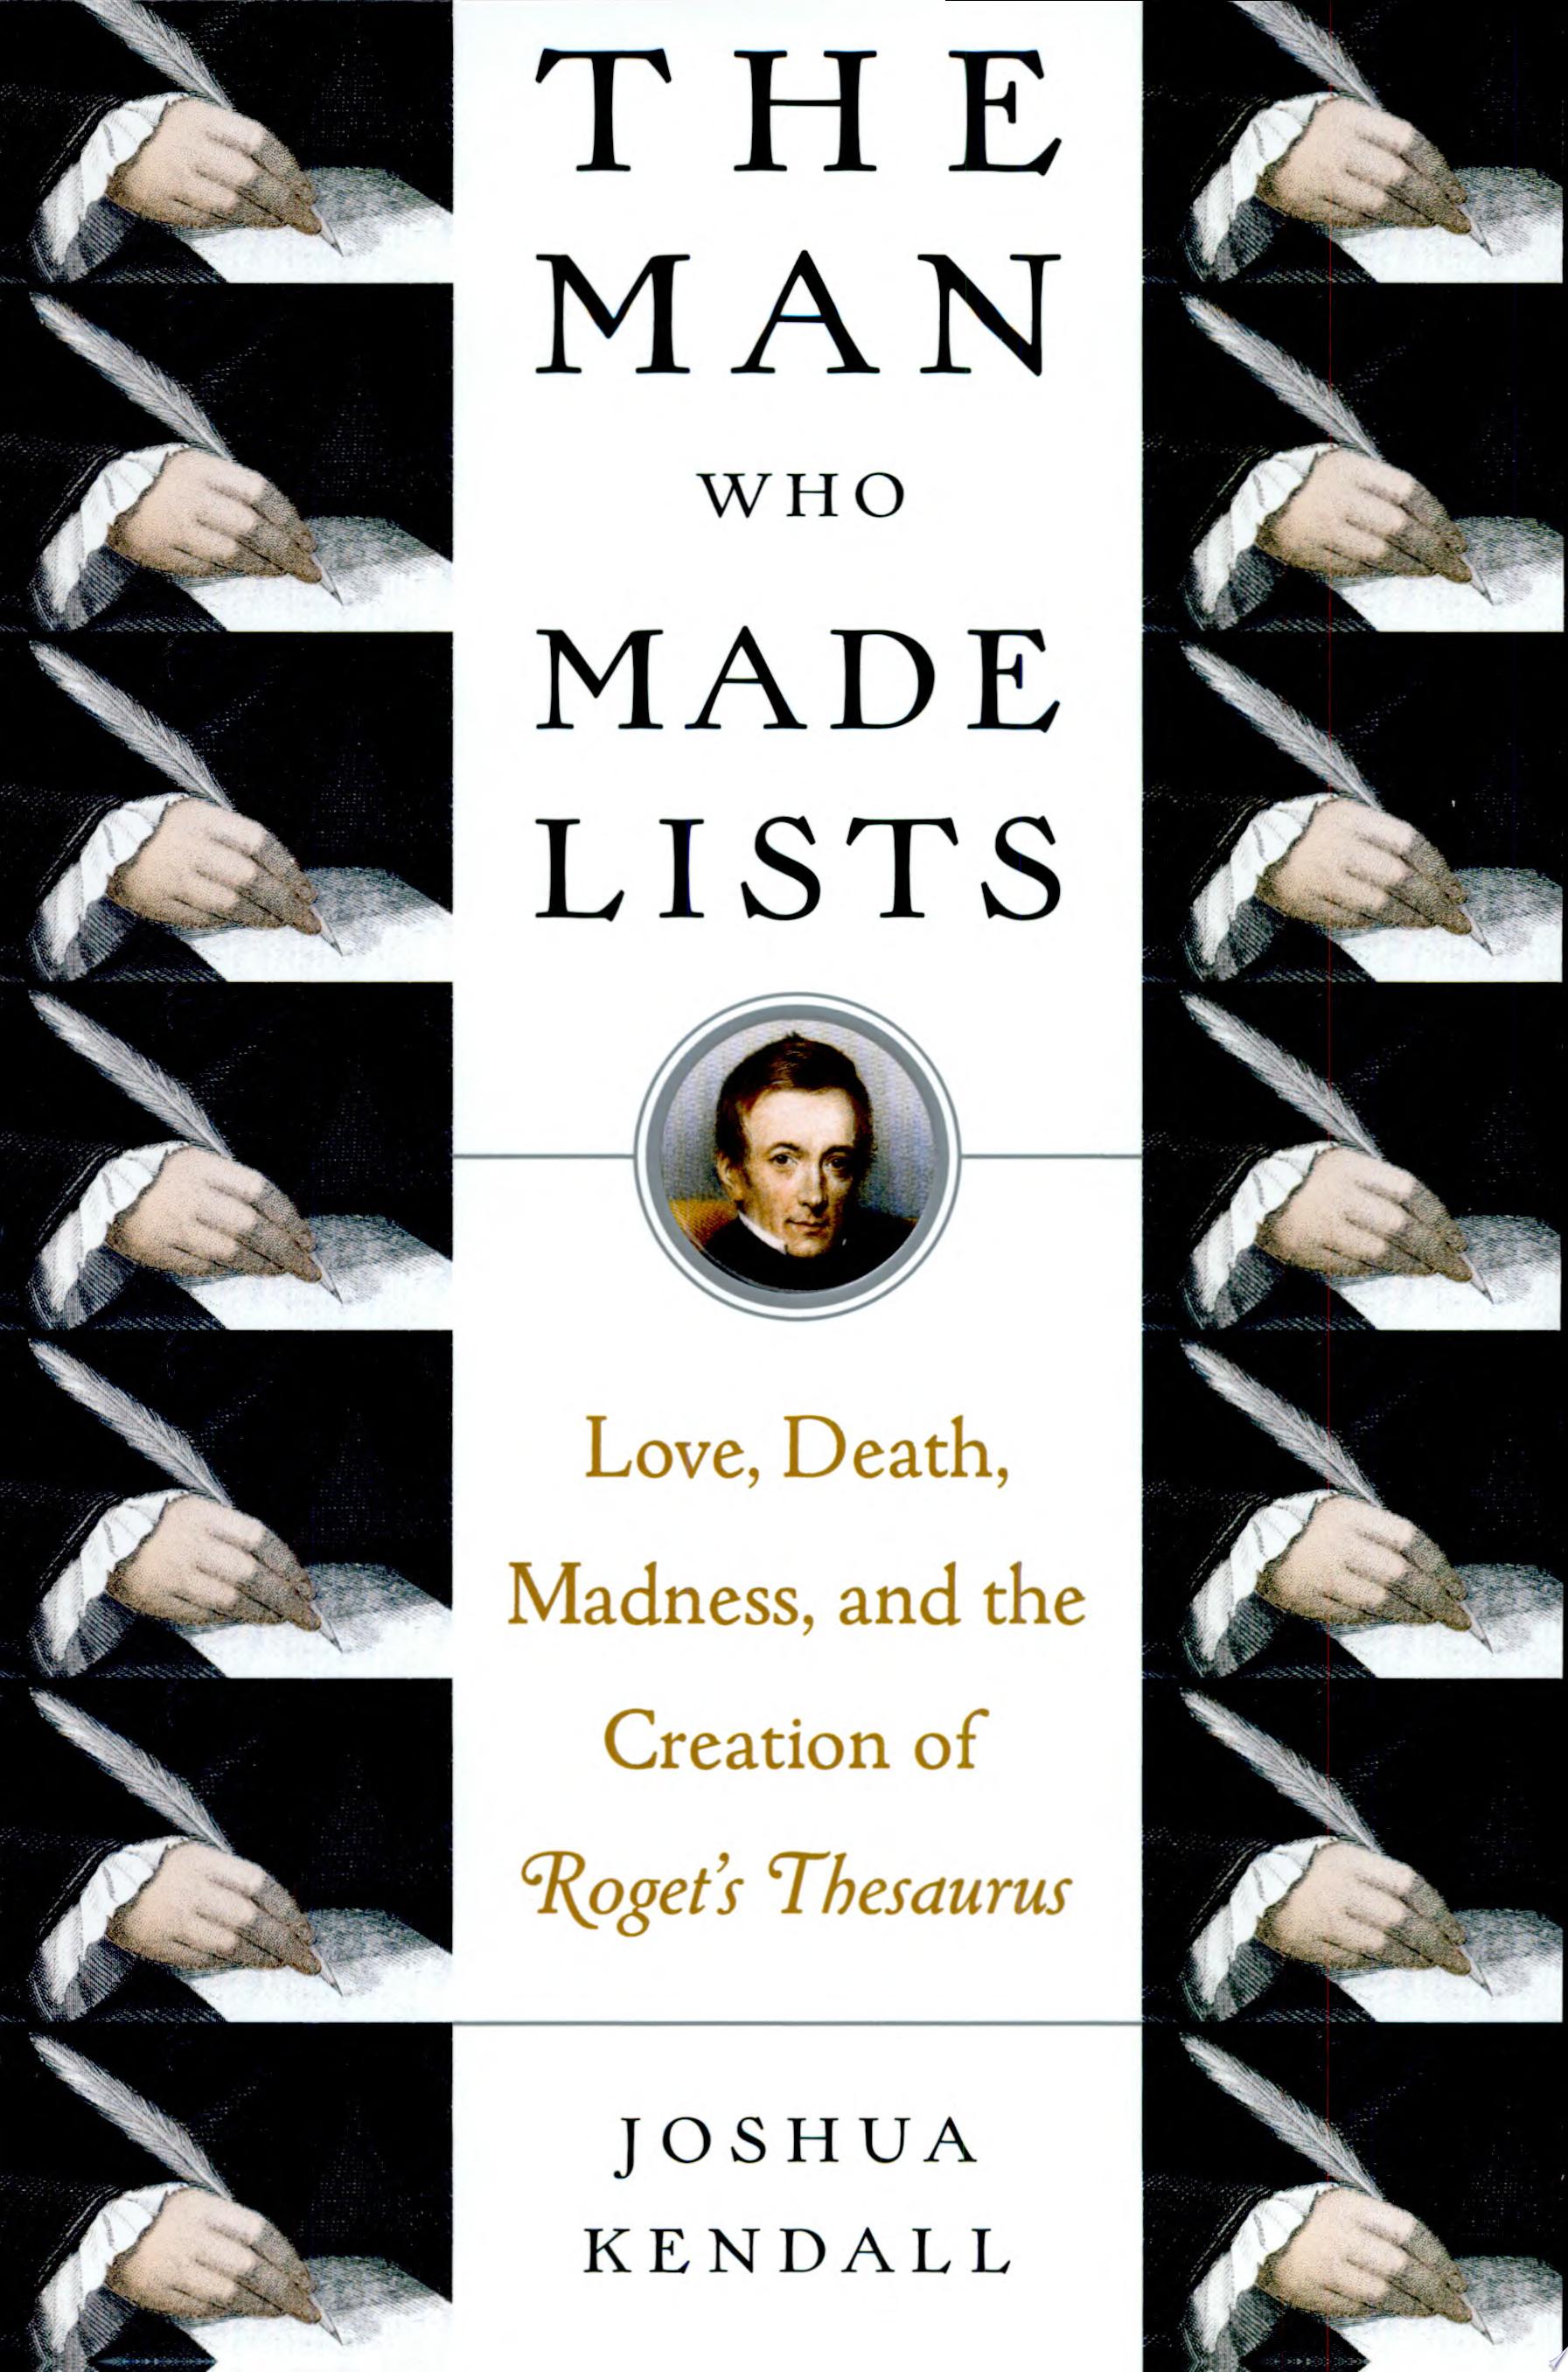 Image for "The Man who Made Lists: love, death, madness, and the creation of Roget's Thesaurus"